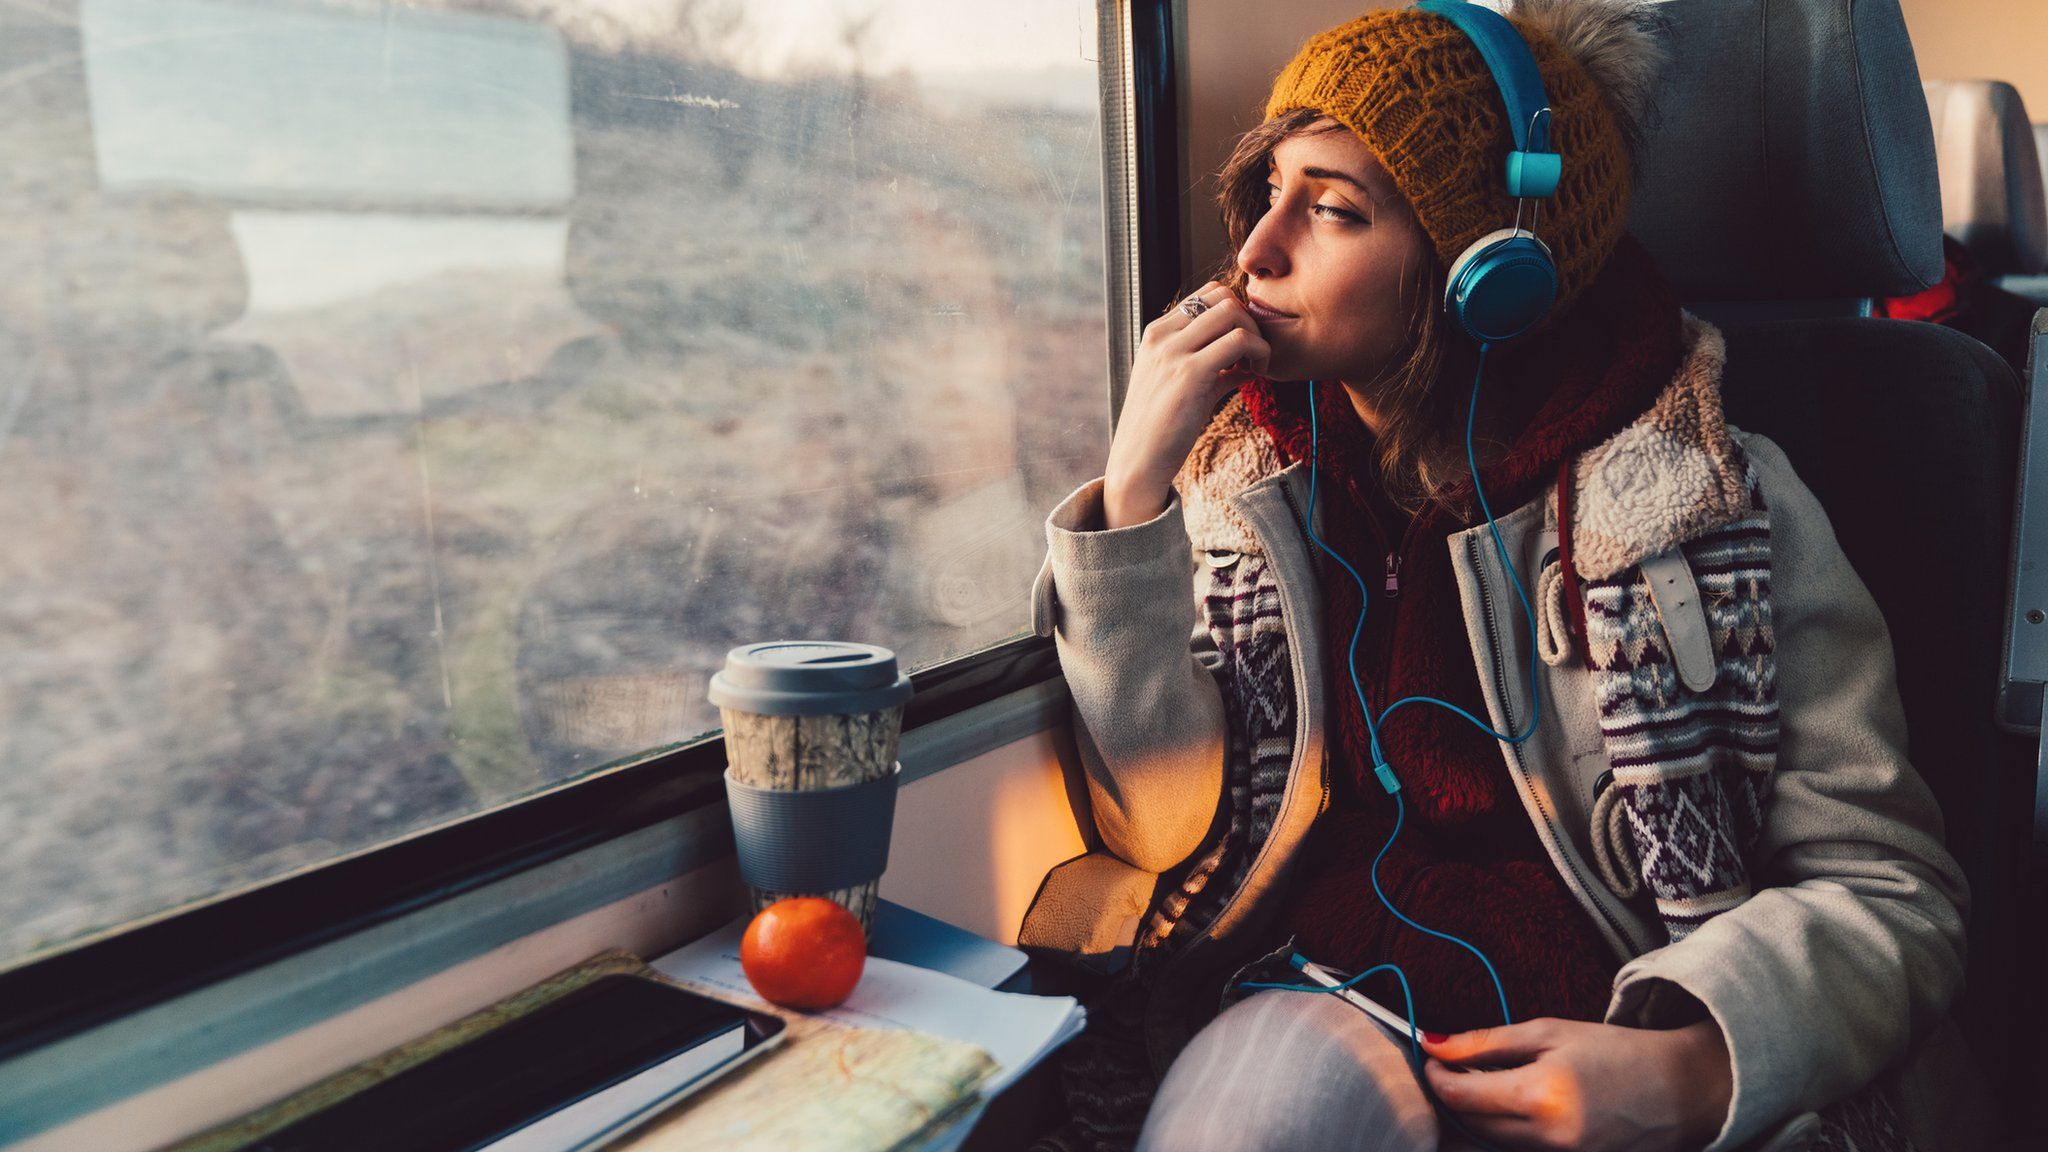 young woman on train